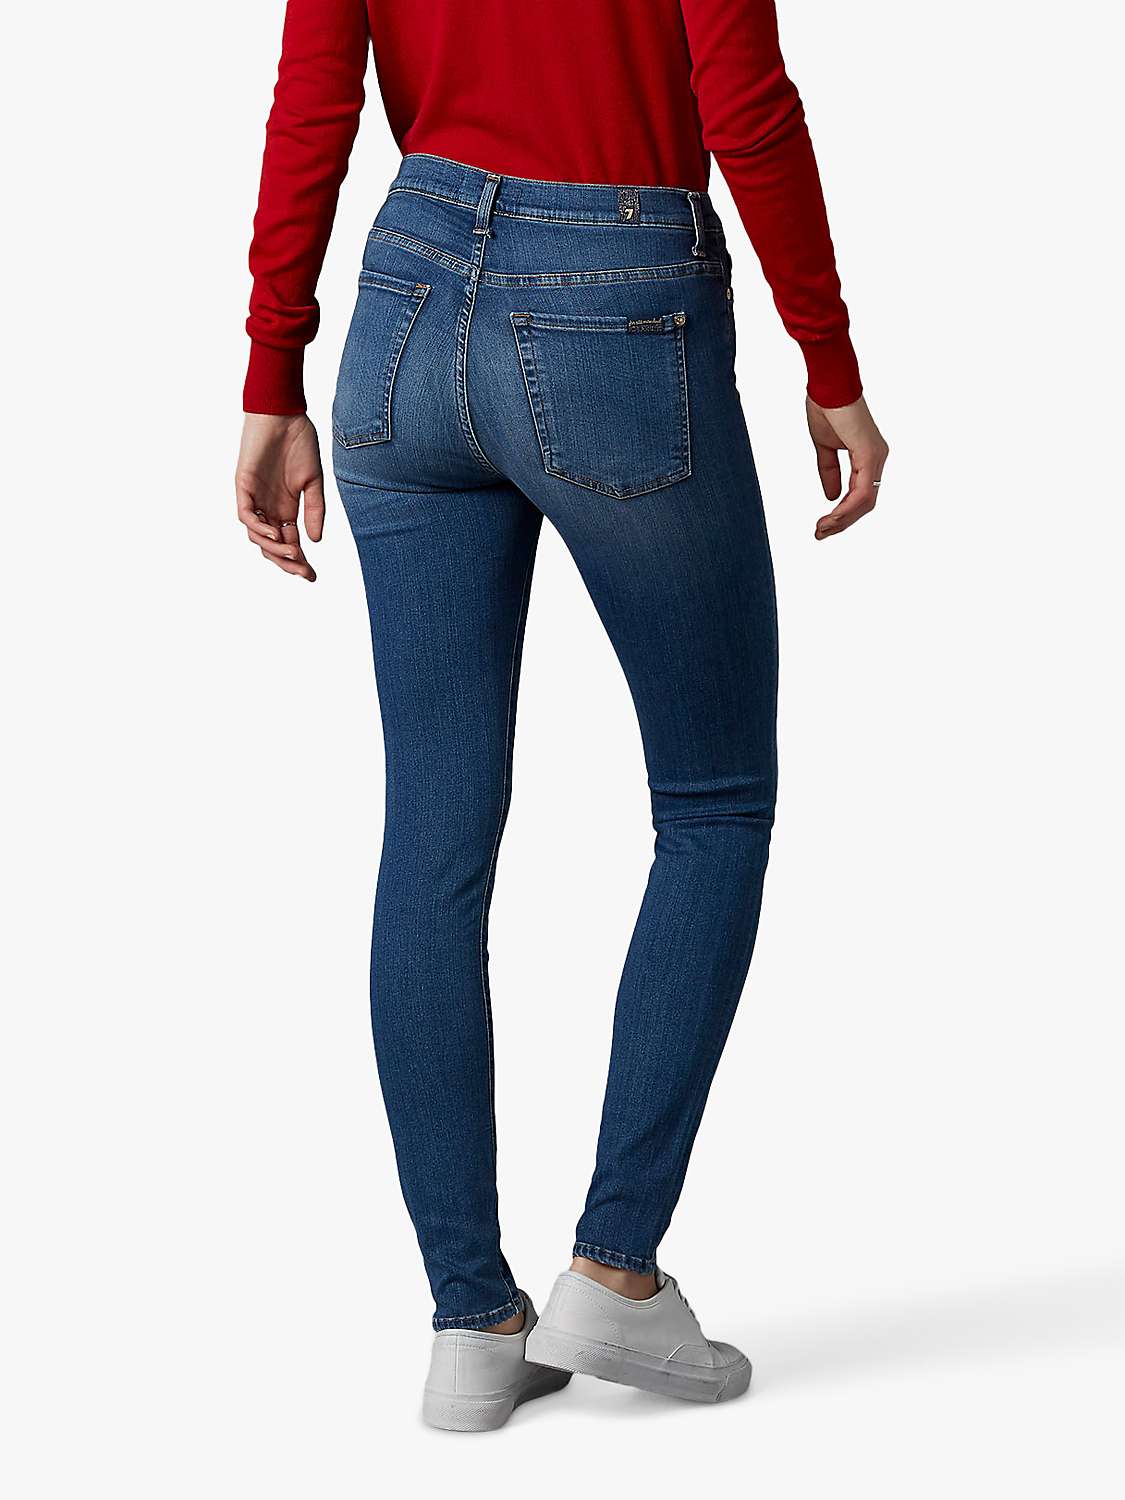 Buy 7 For All Mankind Skinny Slim Fit Jeans, Love Story Online at johnlewis.com